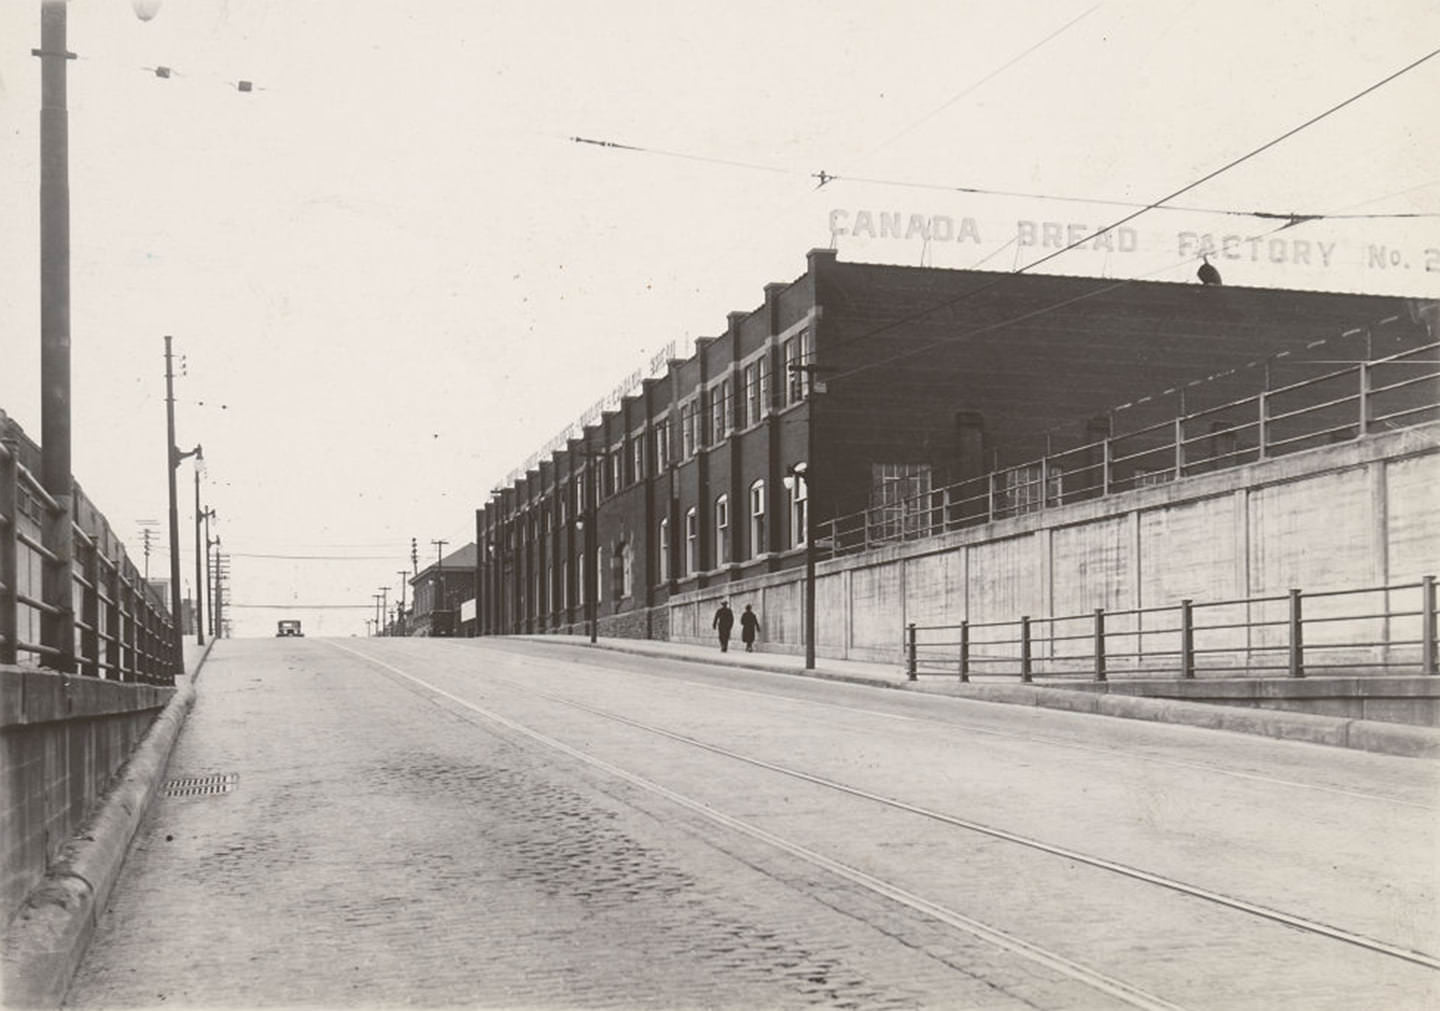 View looking west on Bloor St. W., to Dundas St. W., Canada Bread Company's Factory No. 2 stands prominently here, 1929